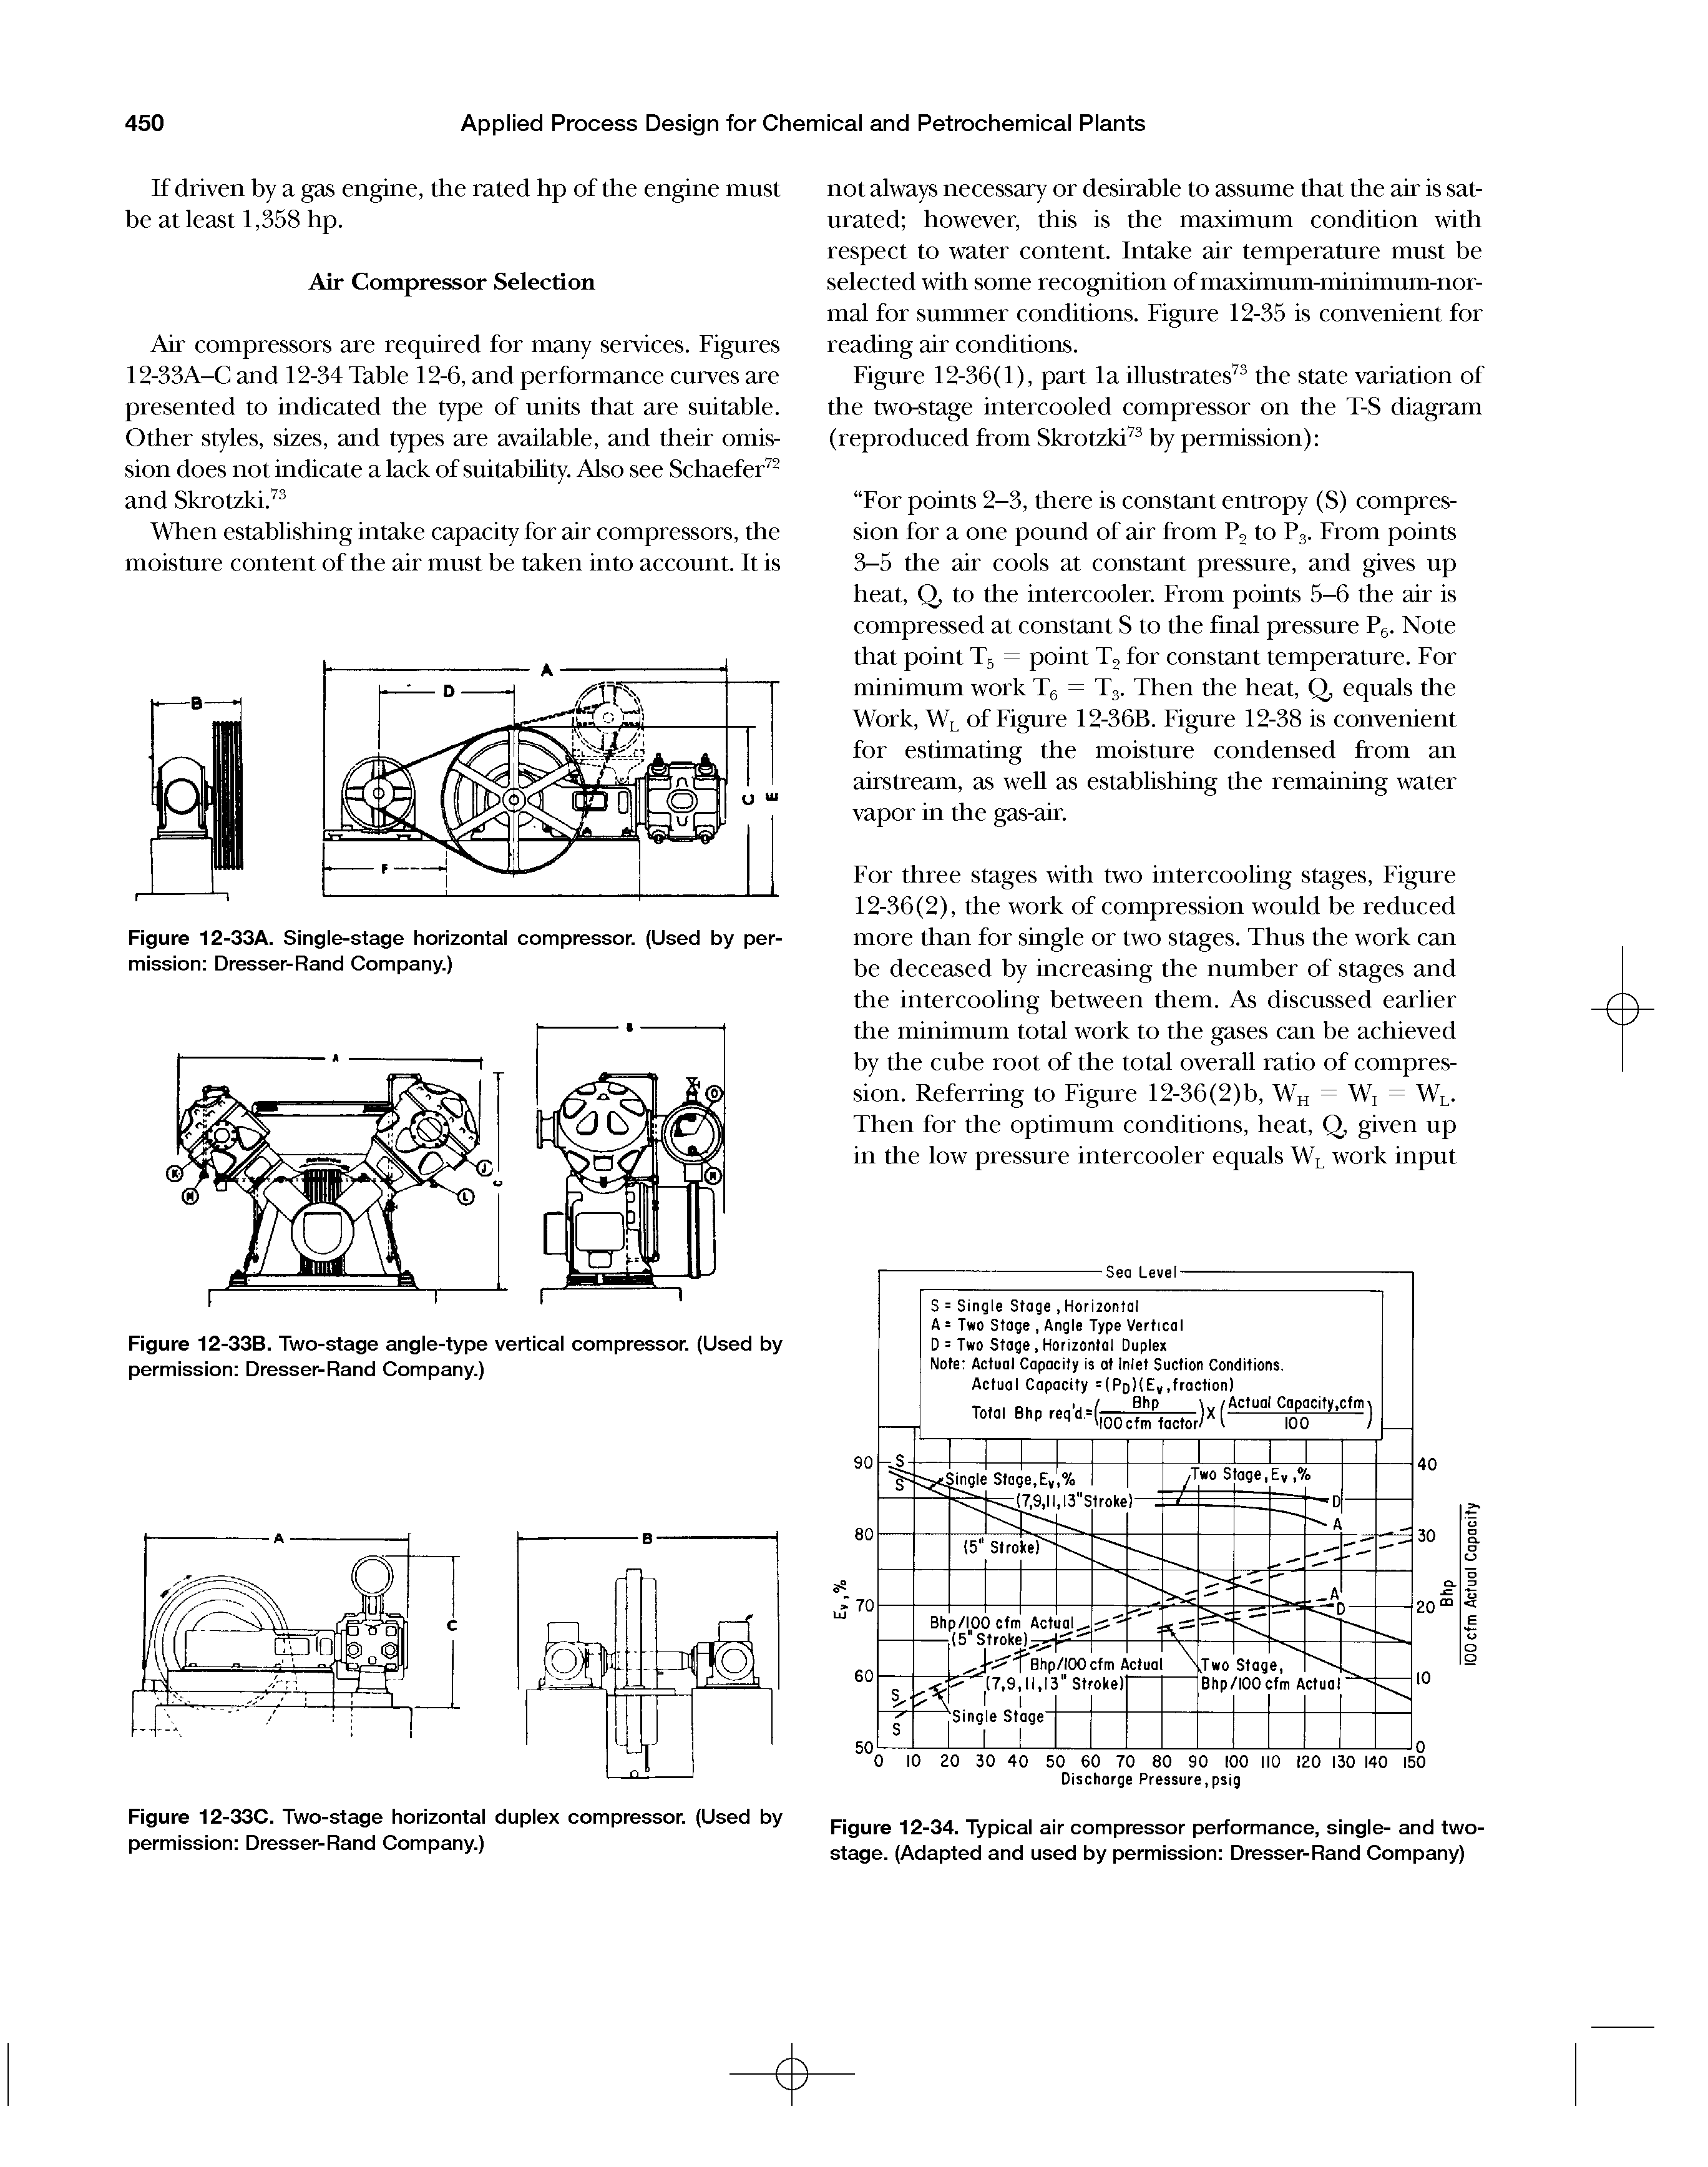 Figure 12-34. Typical air compressor performance, single- and two-stage. (Adapted and used by permission Dresser-Rand Company)...